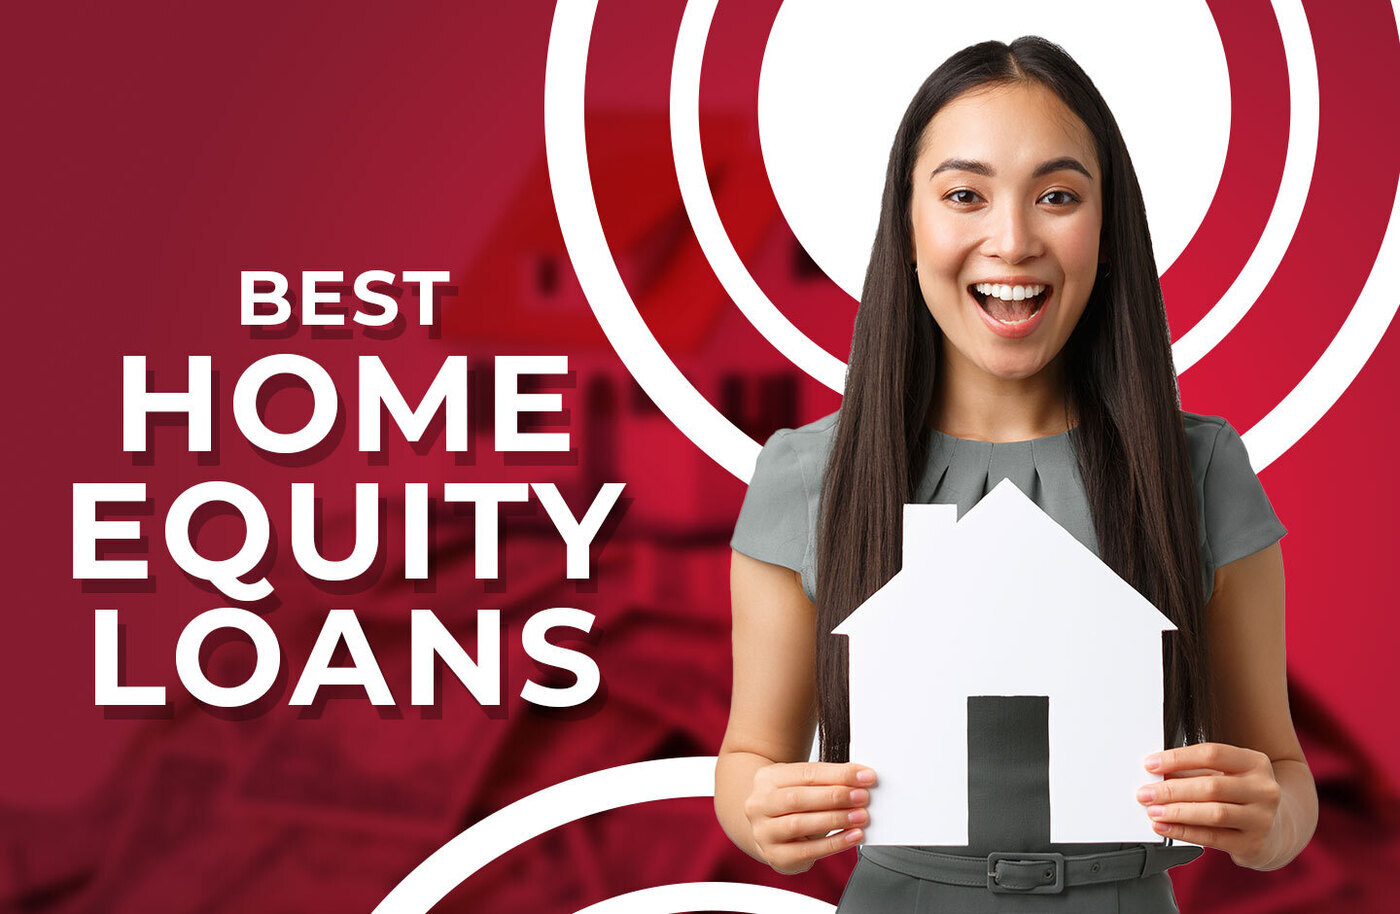 The Best Home Equity Loans 2022 Reviews and Ratings of Top Companies